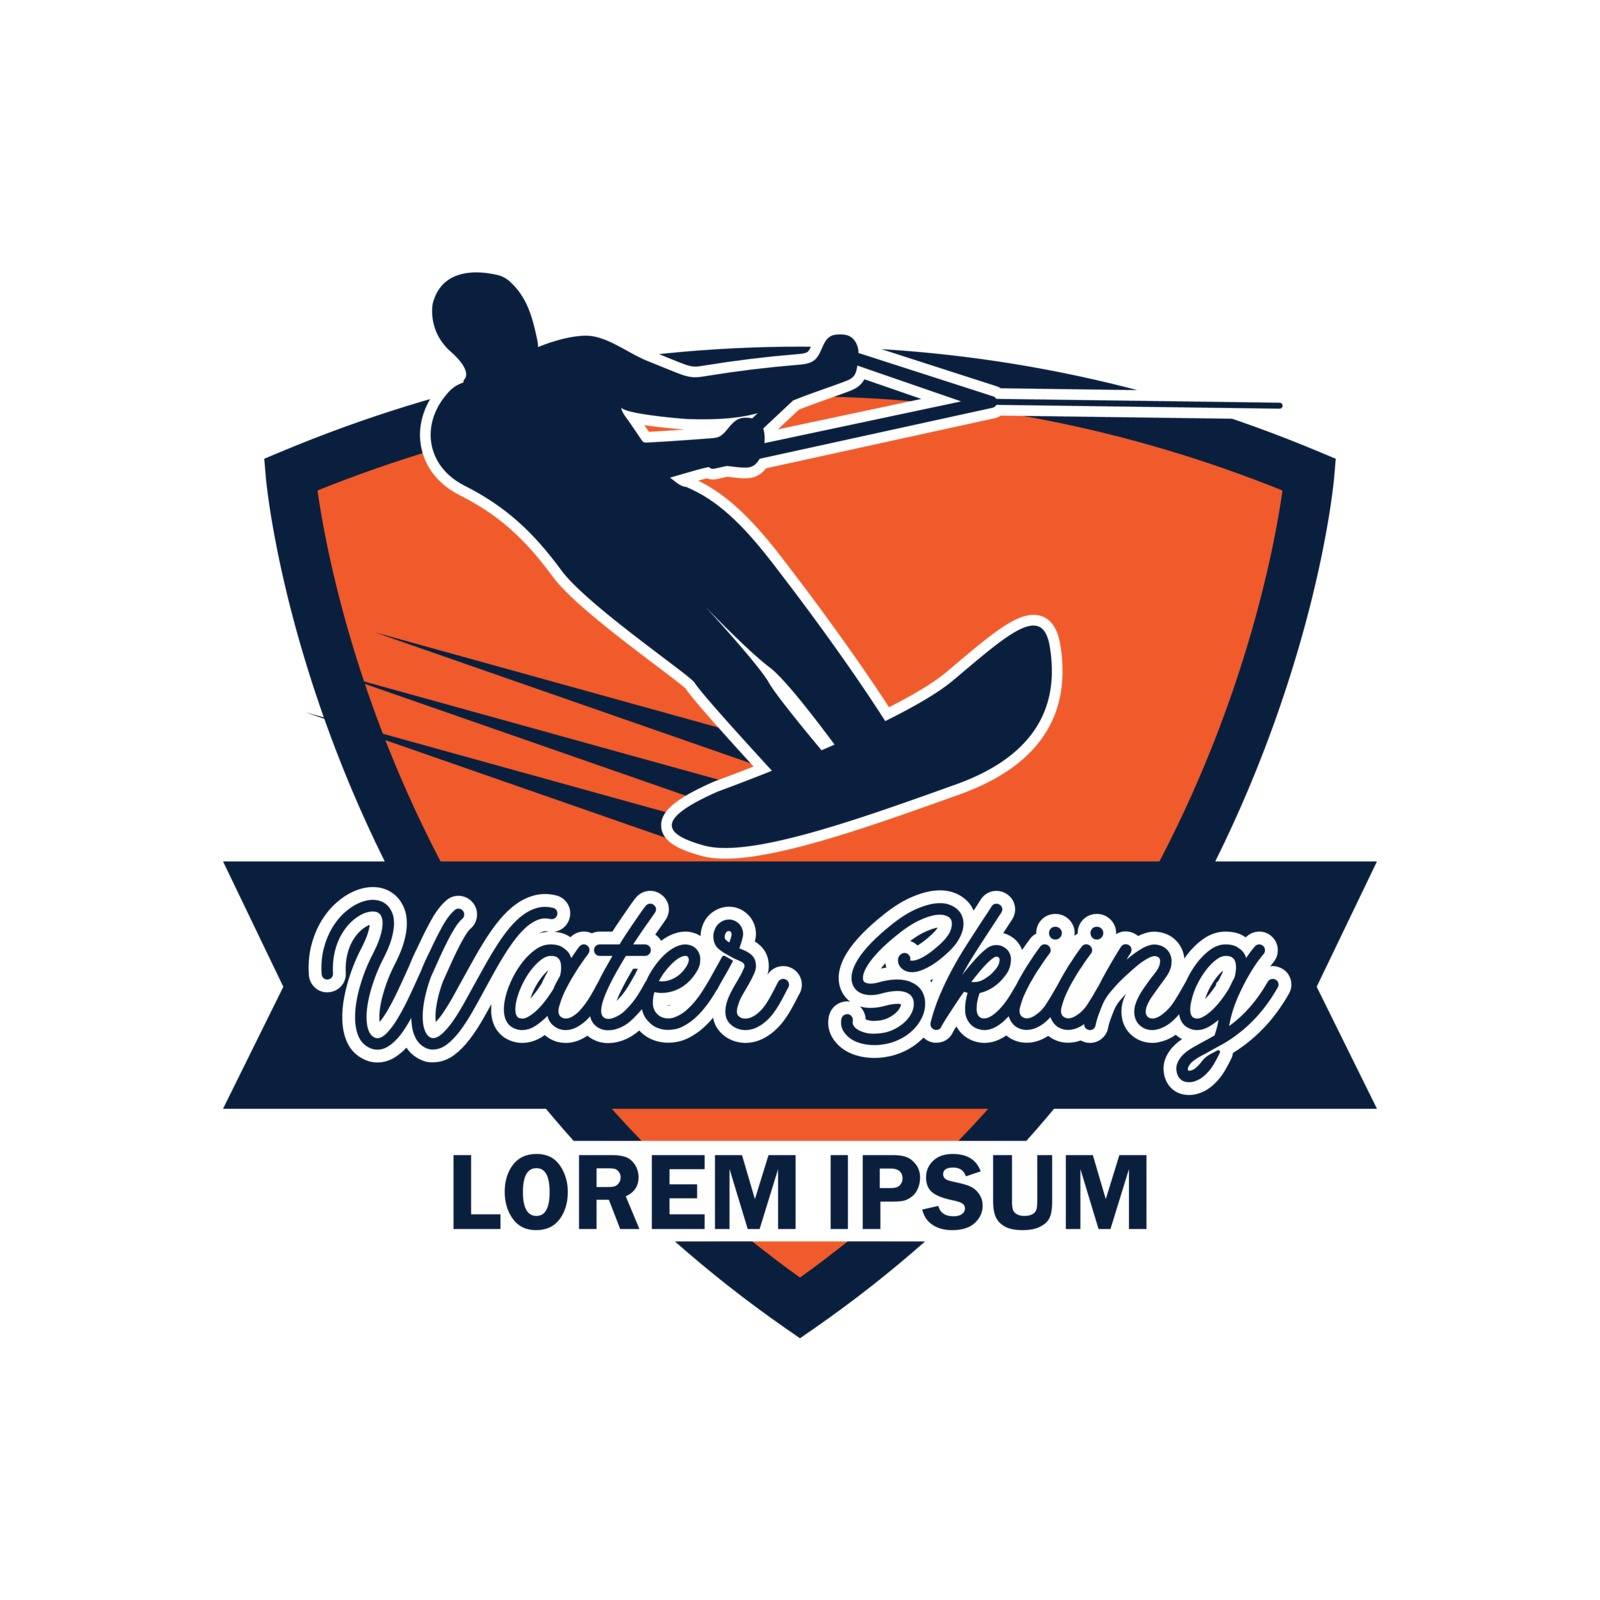 water skiing logo with text space for your slogan / tag line, vector illustration